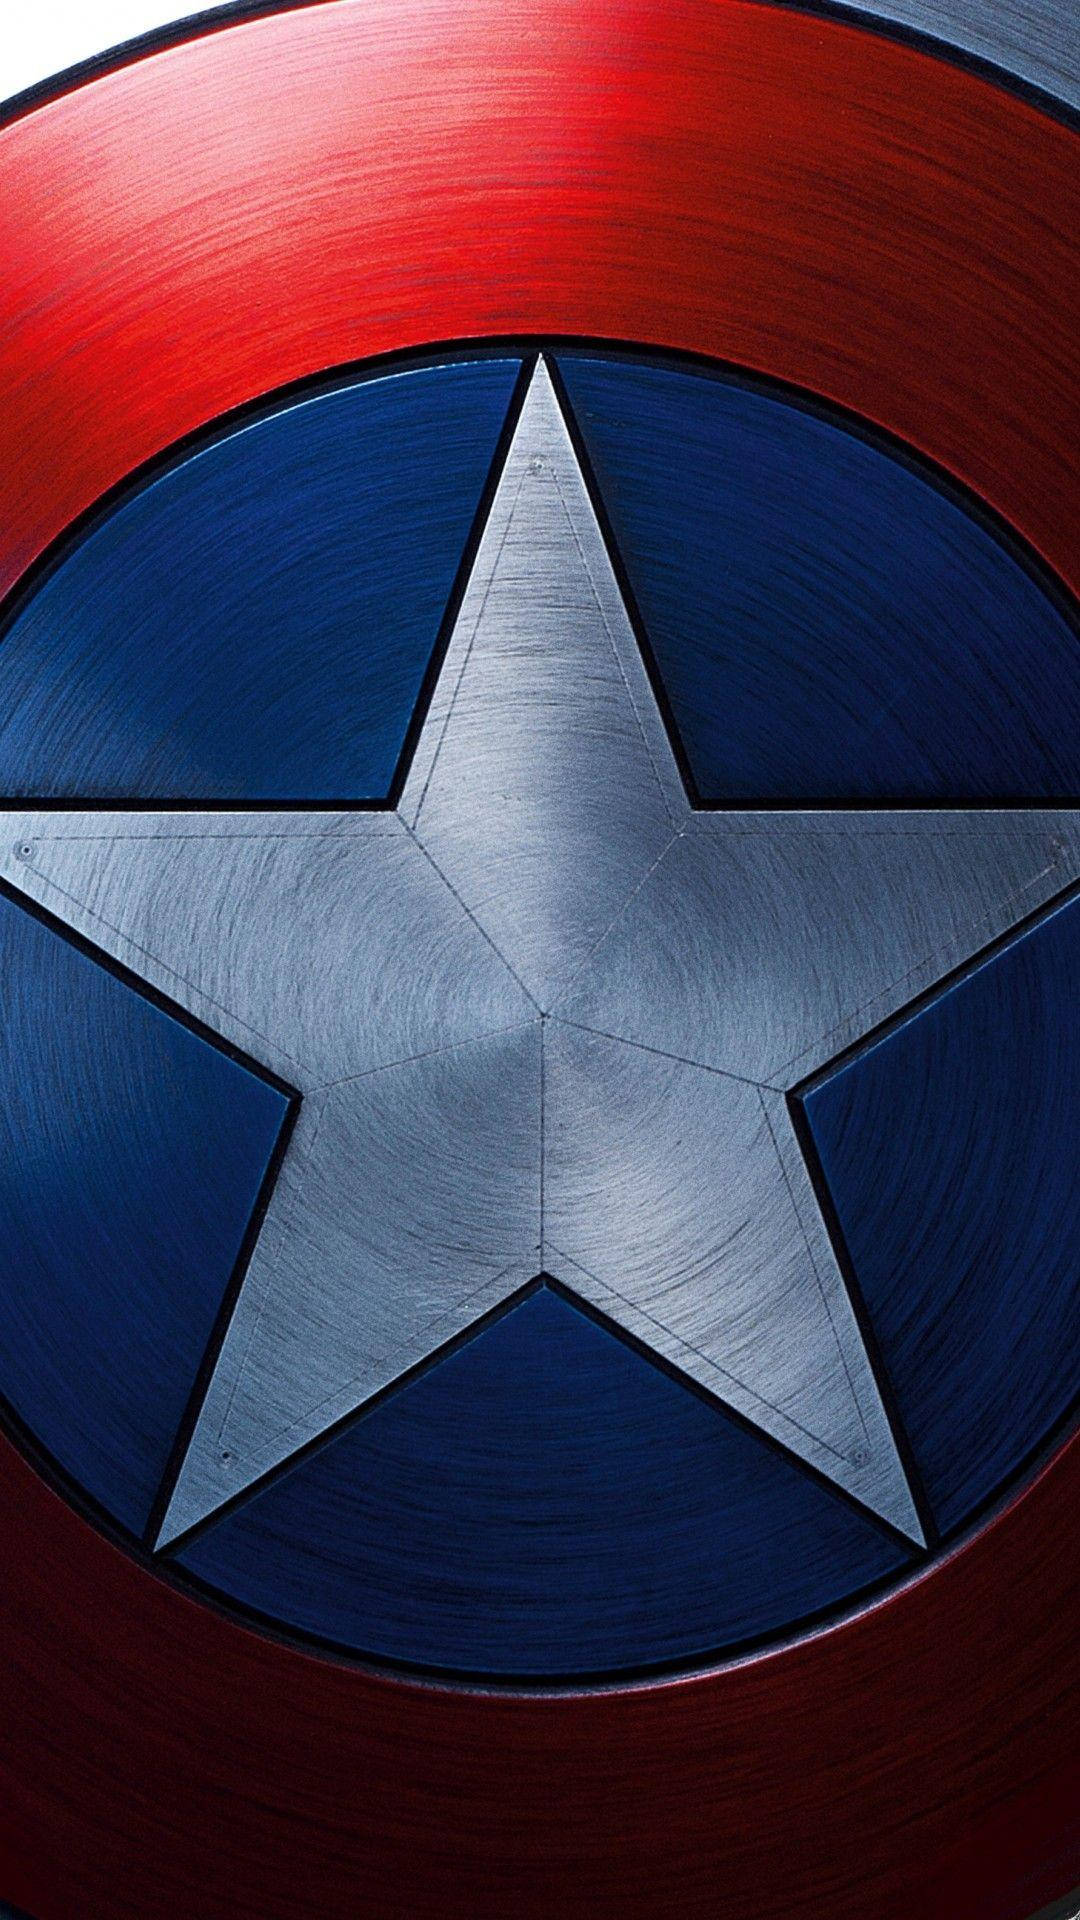 Captain America's Shield Marvel Iphone X Background